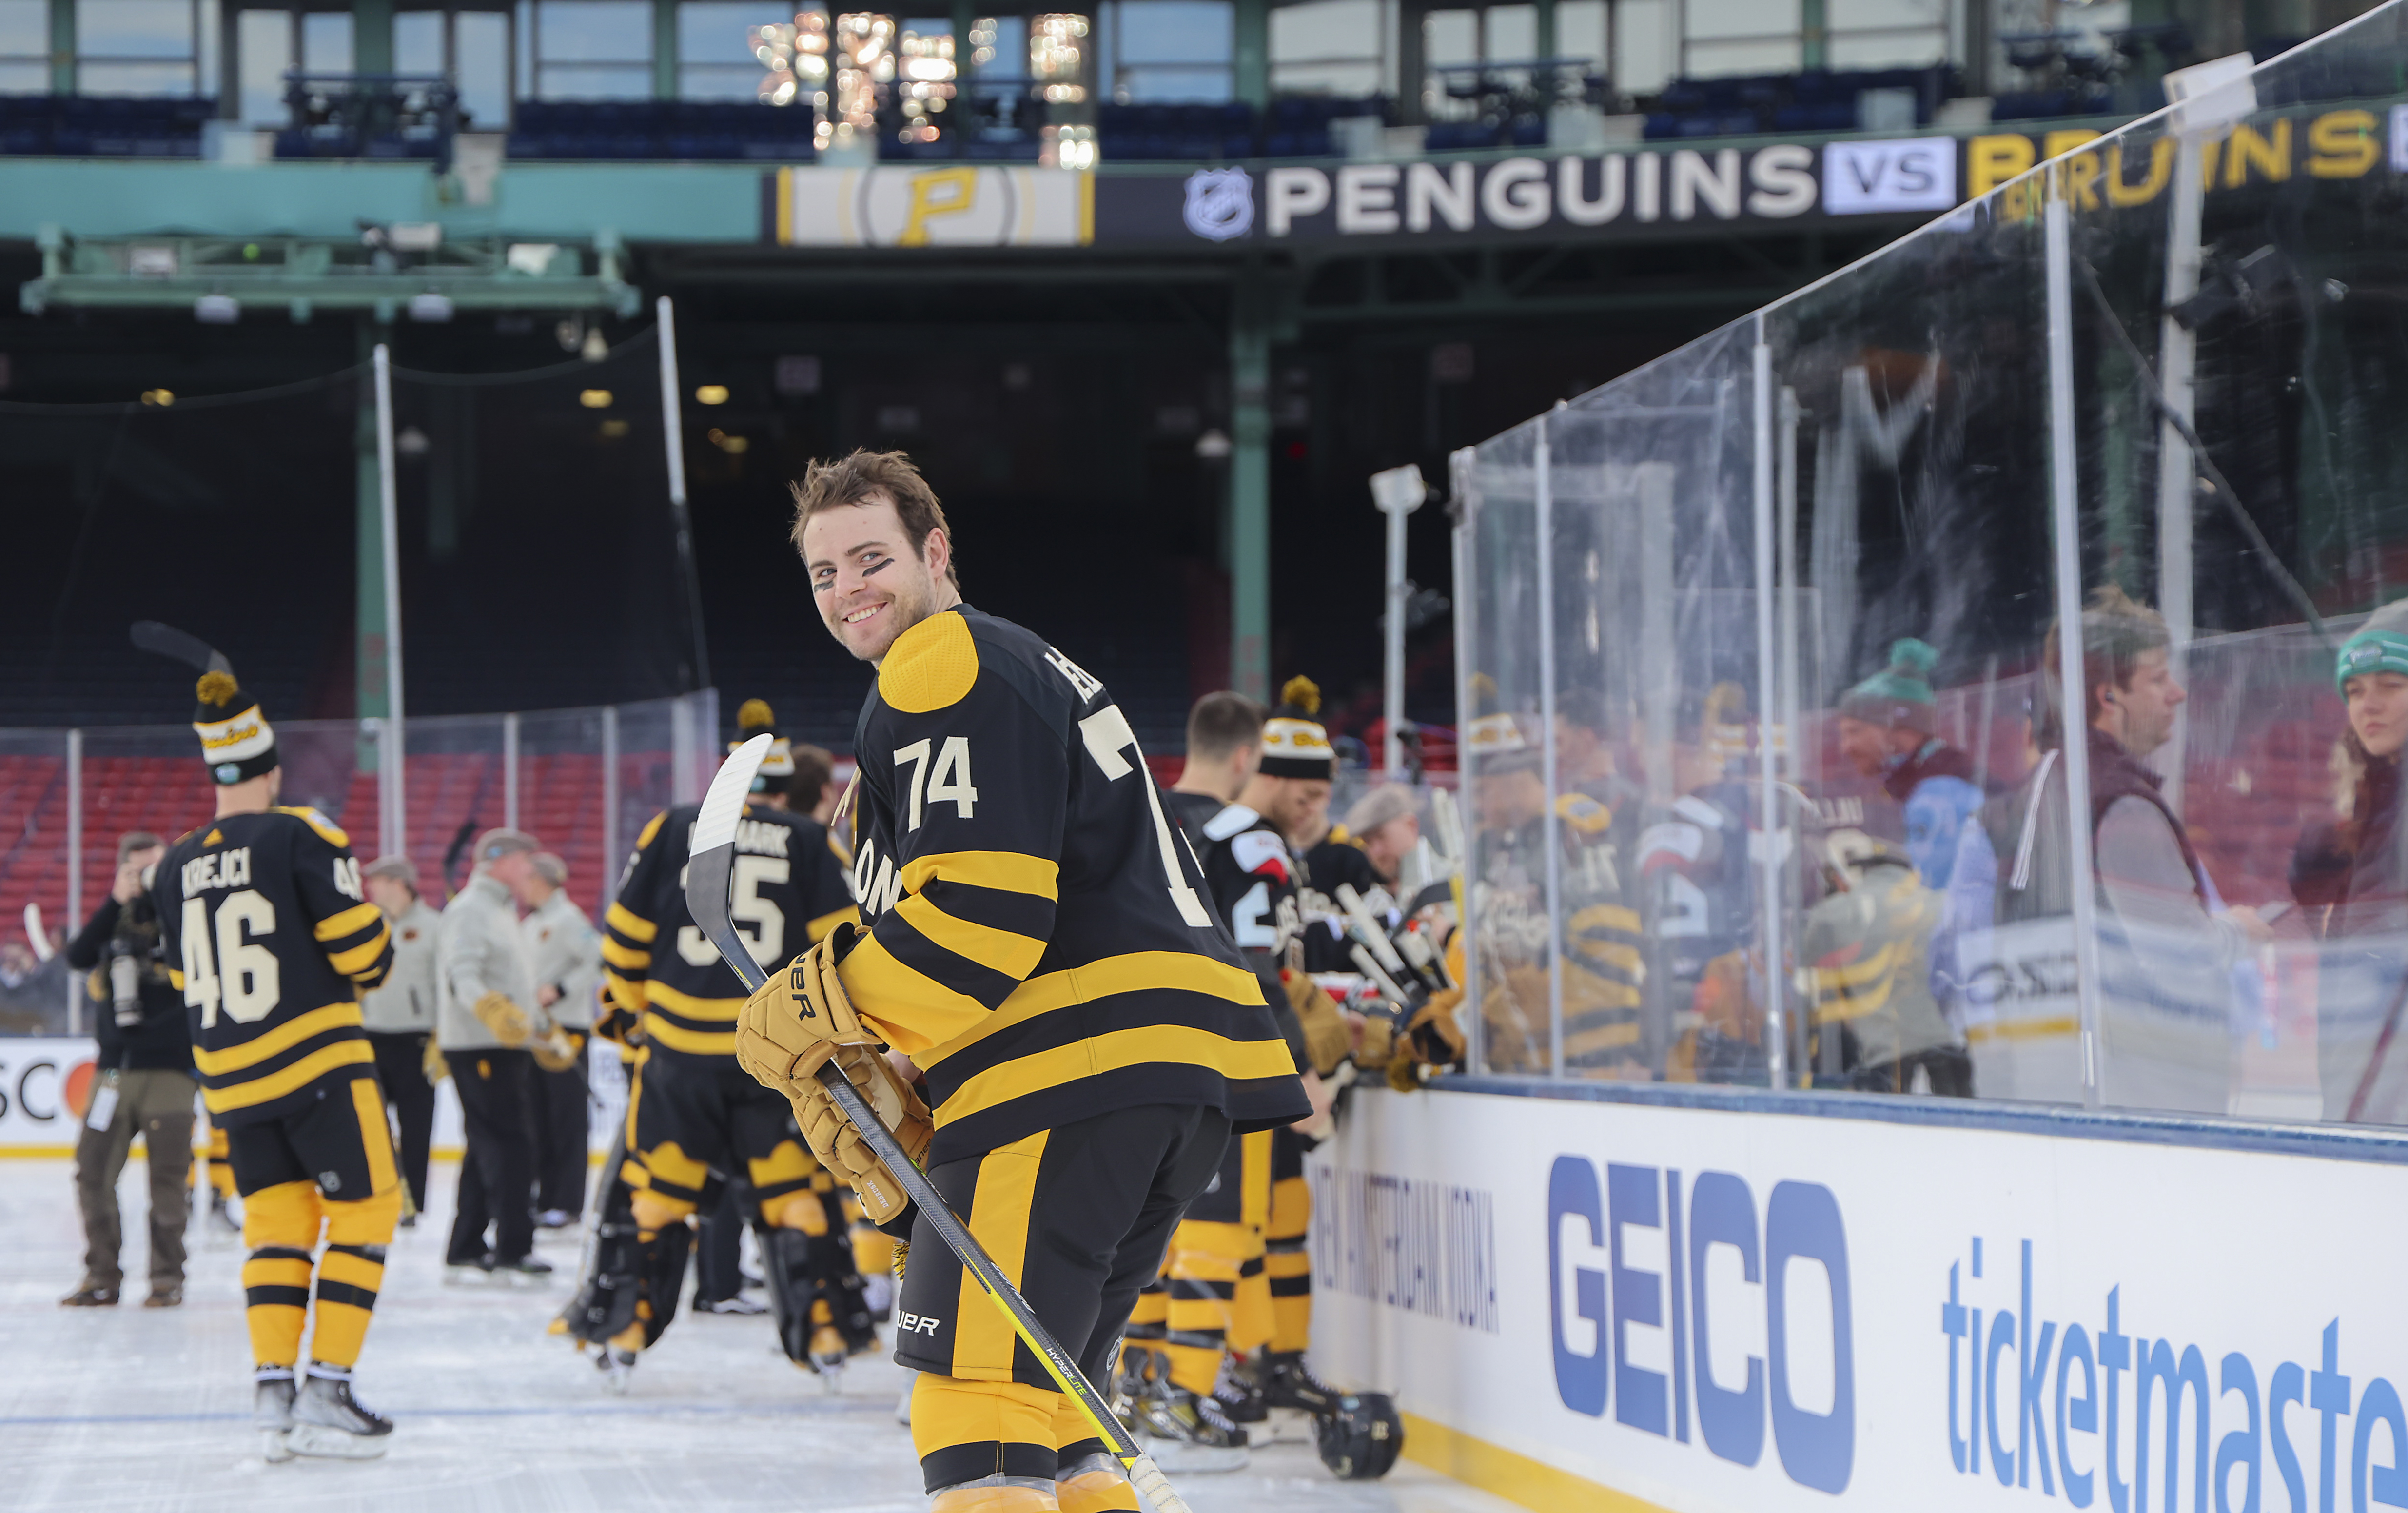 They're kind of a different breed:' Bruins receive high compliments from NHL's  All-Stars - The Boston Globe